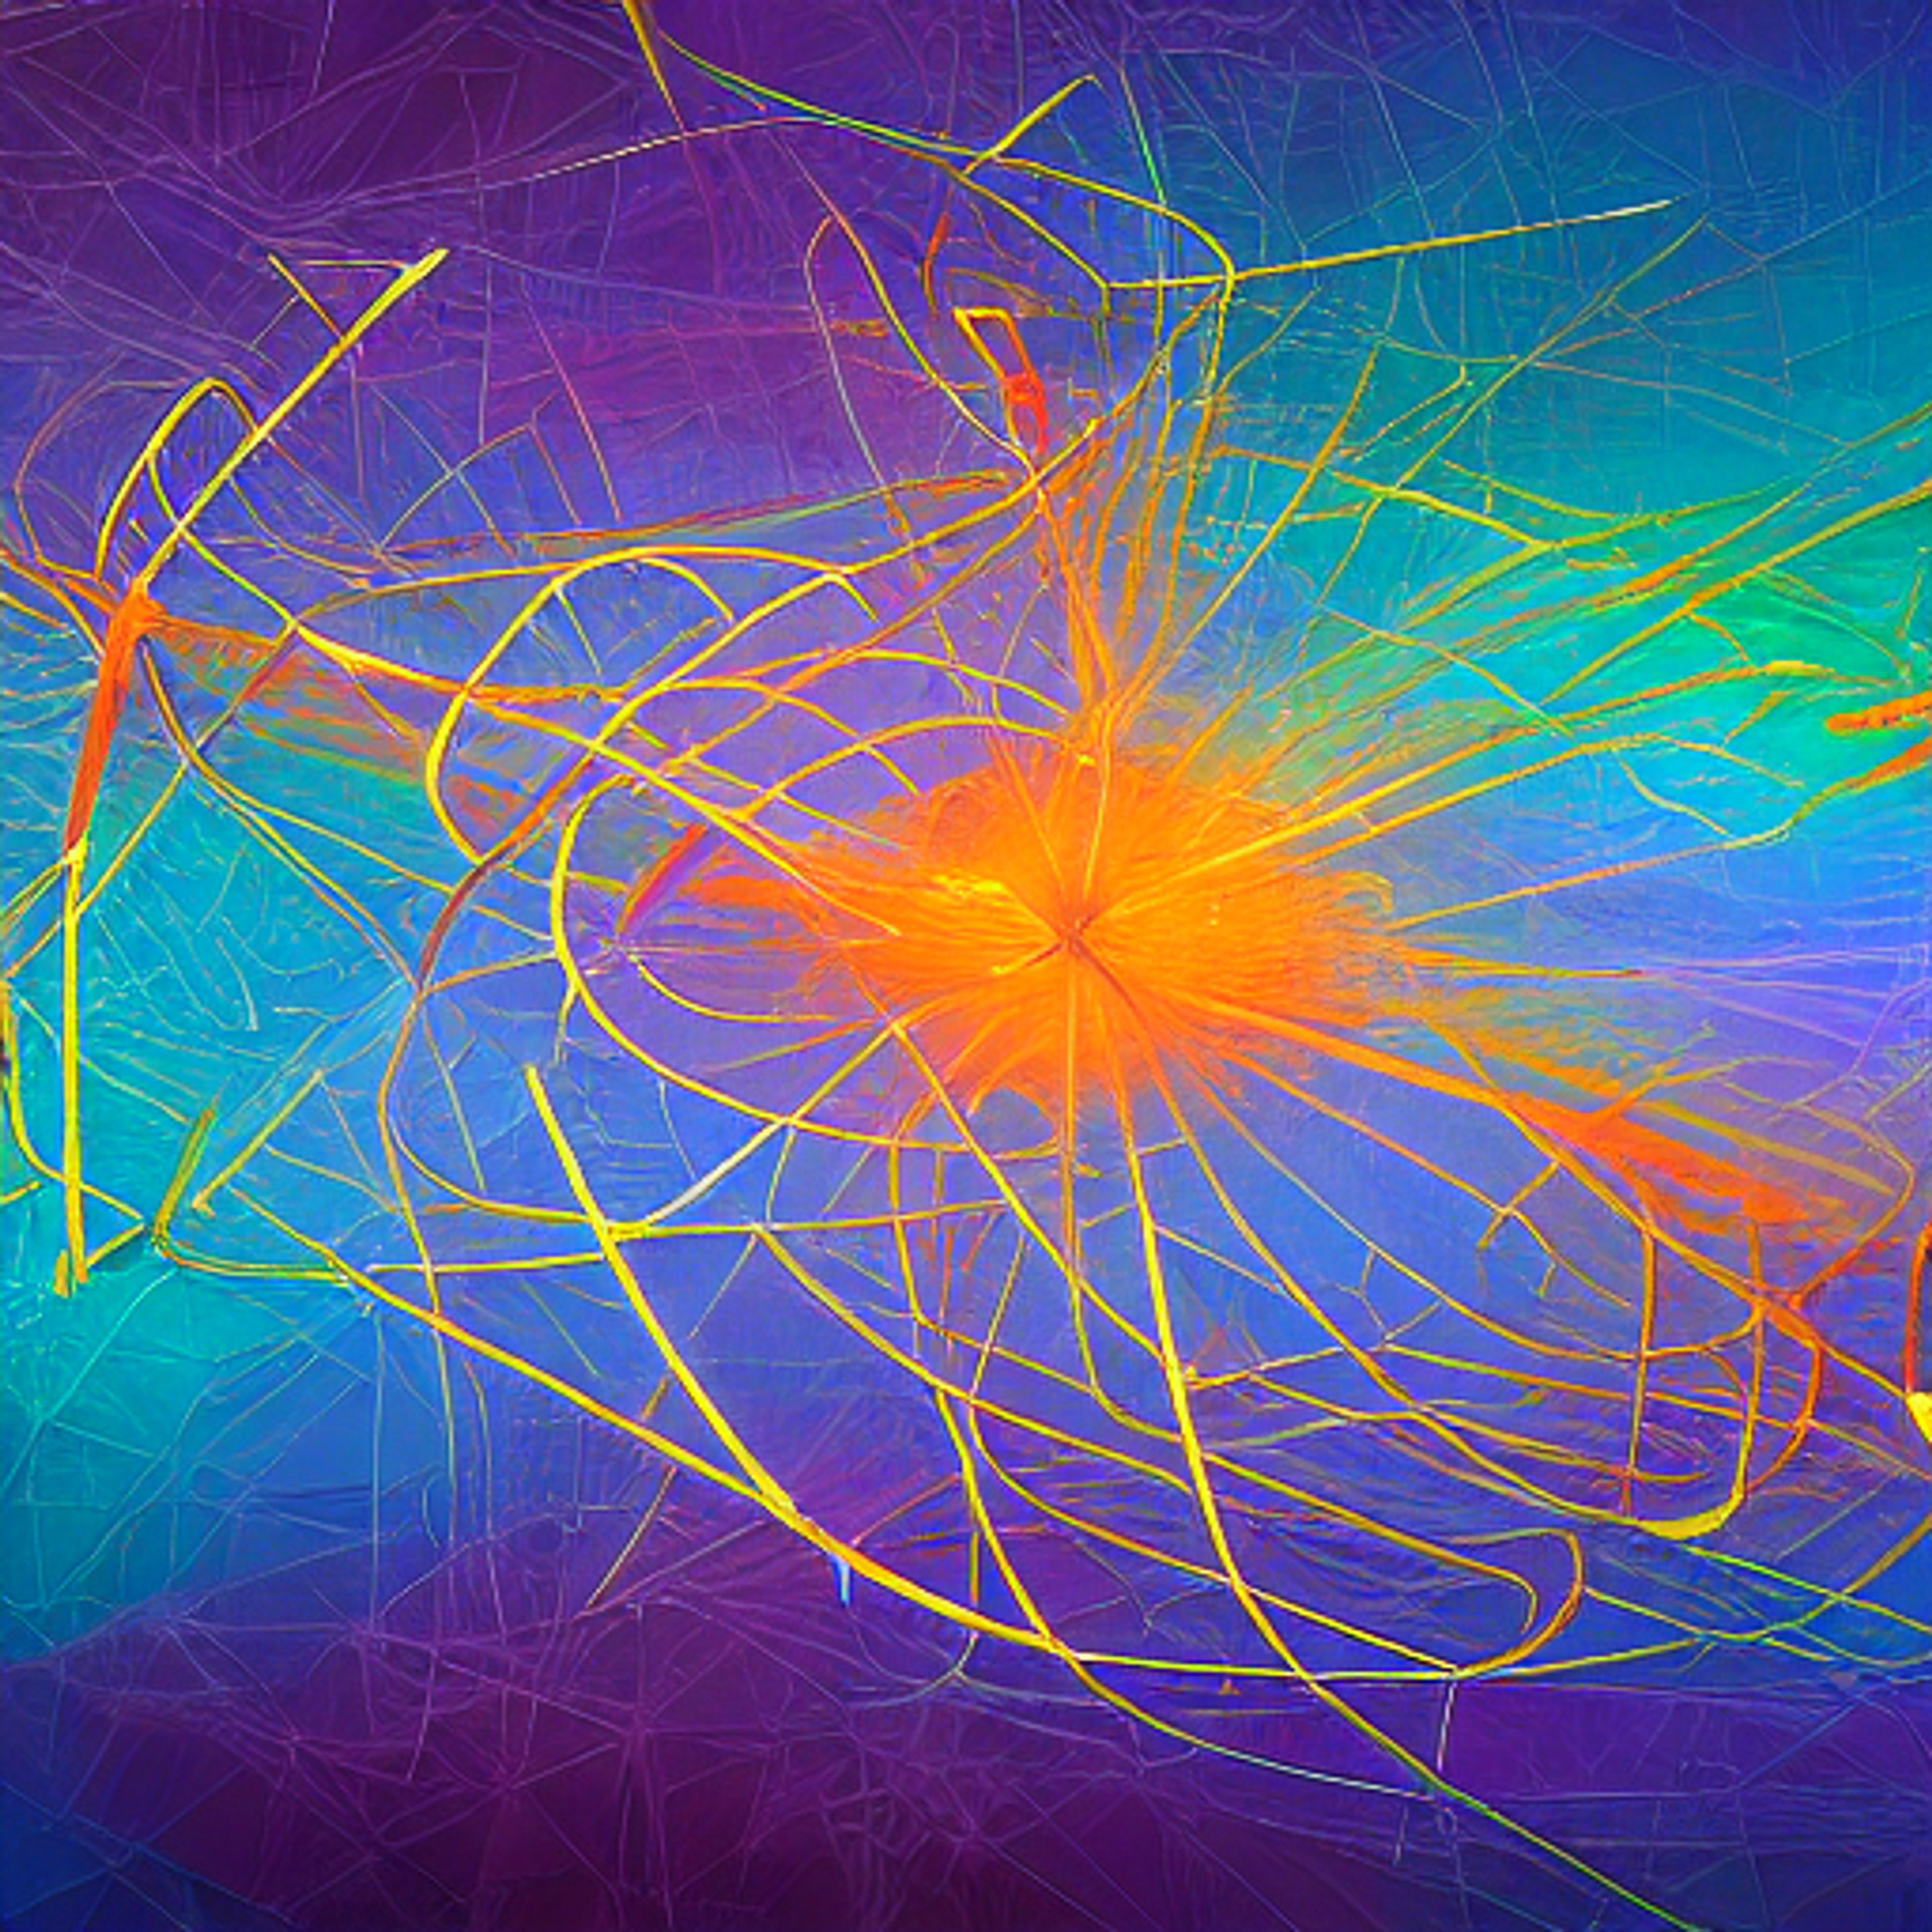 Abstract painting of networking visuals